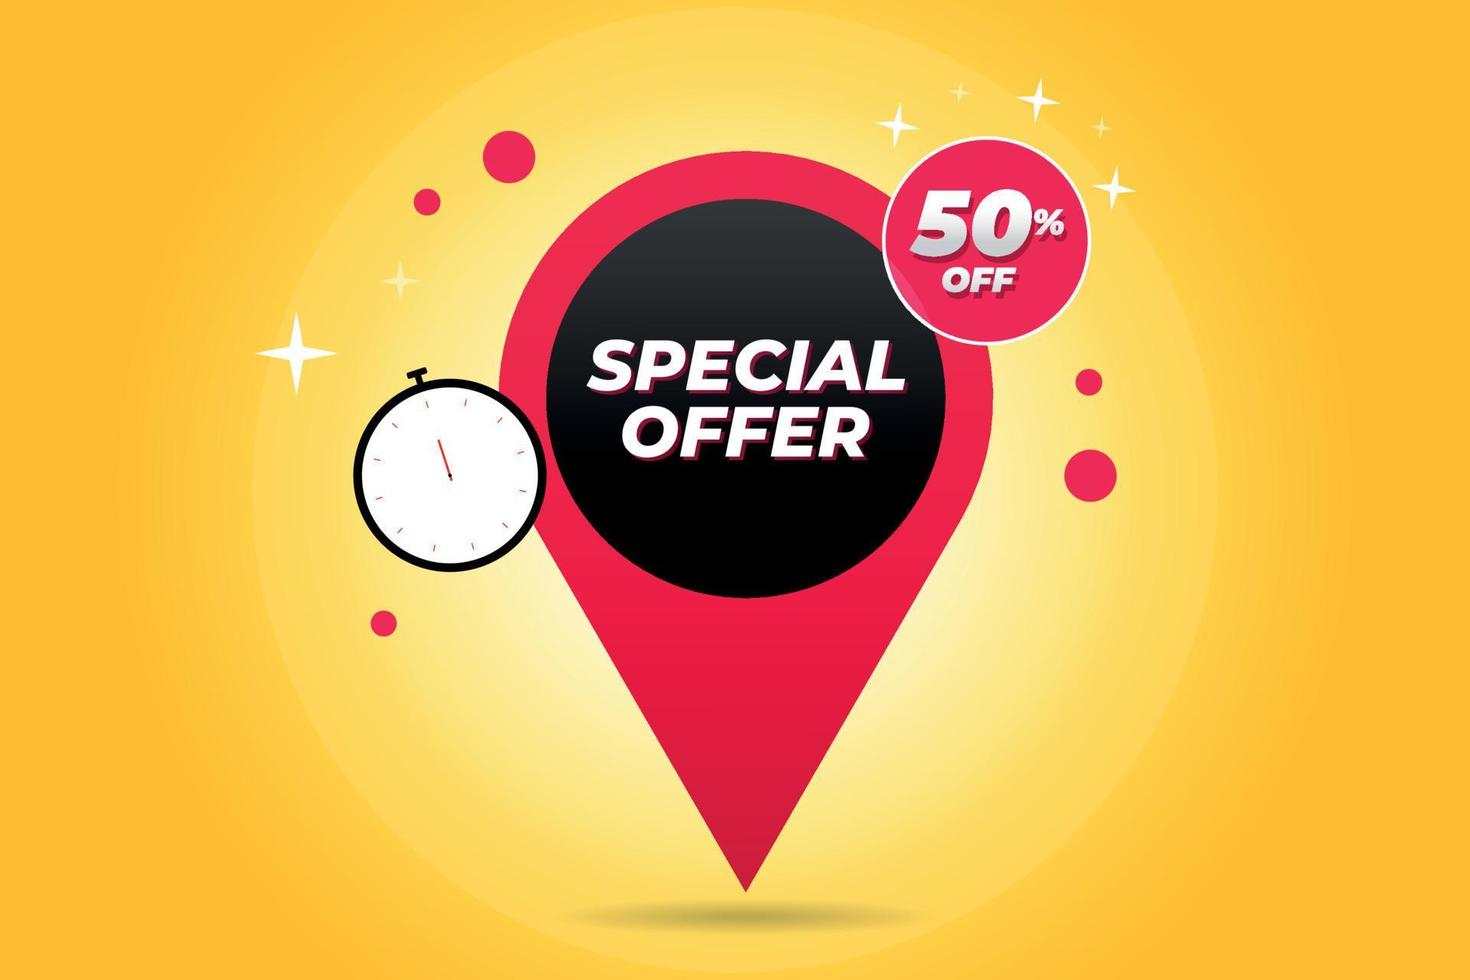 Special offer 50 percent off on pin icon vector